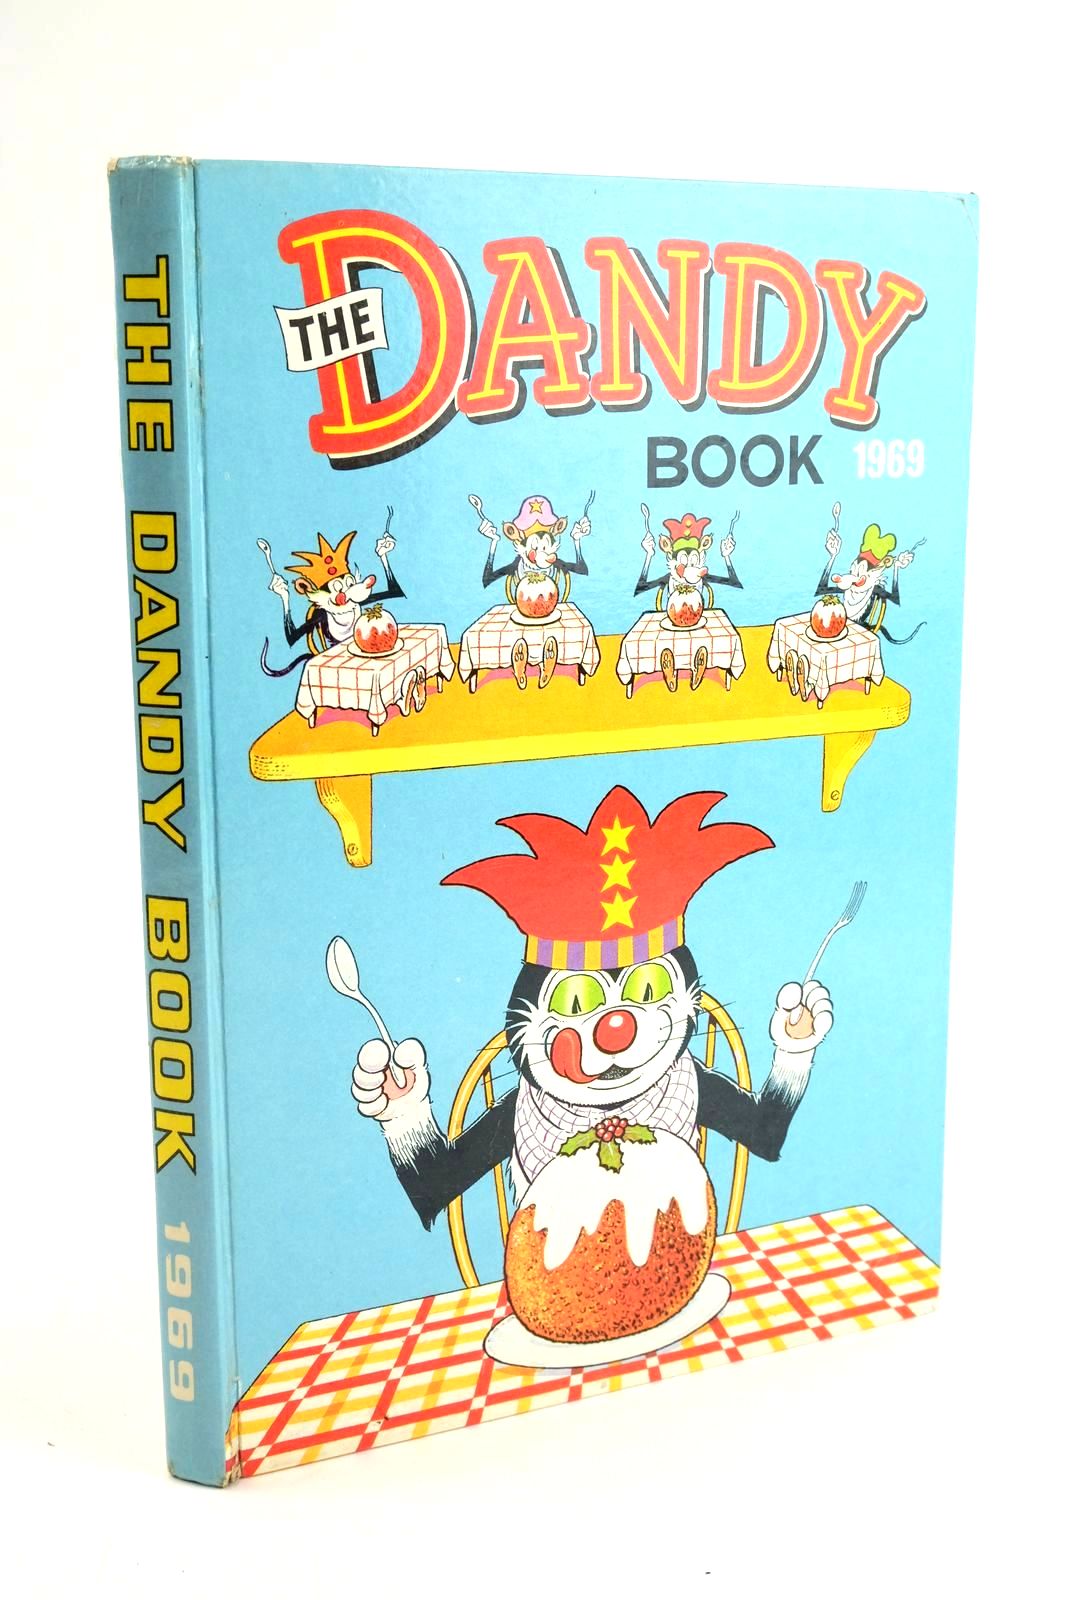 Photo of THE DANDY BOOK 1969 published by D.C. Thomson &amp; Co Ltd. (STOCK CODE: 1323578)  for sale by Stella & Rose's Books